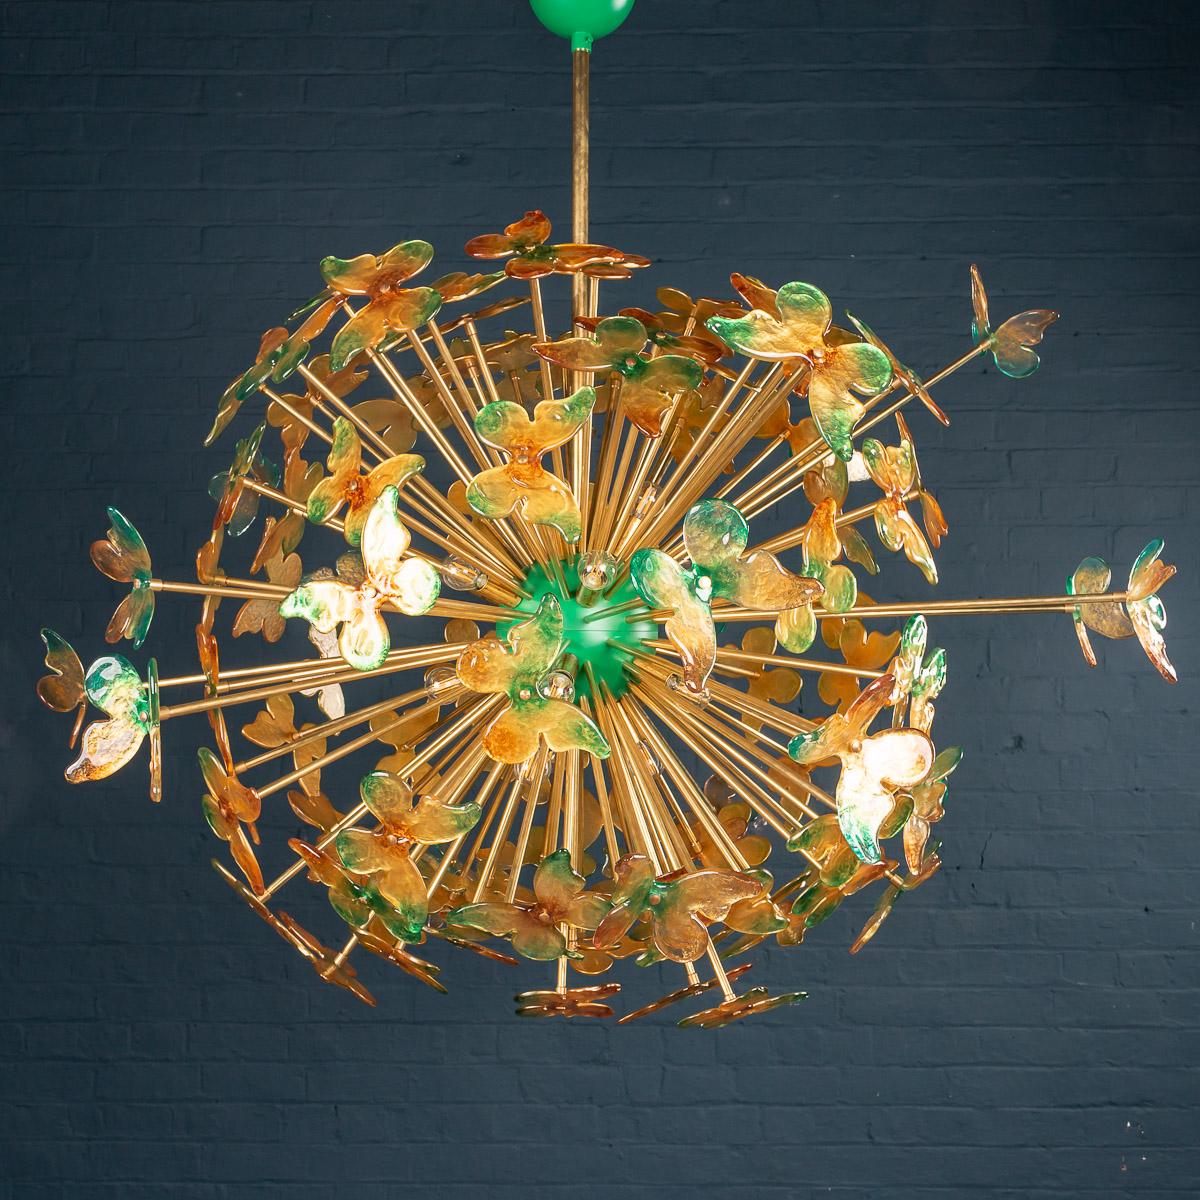 Very large Venetian handmade chandelier, inspired by 1950s “Sputnik“ models, made with glass green and gold butterflies exploding from the centre. A truly spectacular piece of interior design, made in a very limited number in Venice,